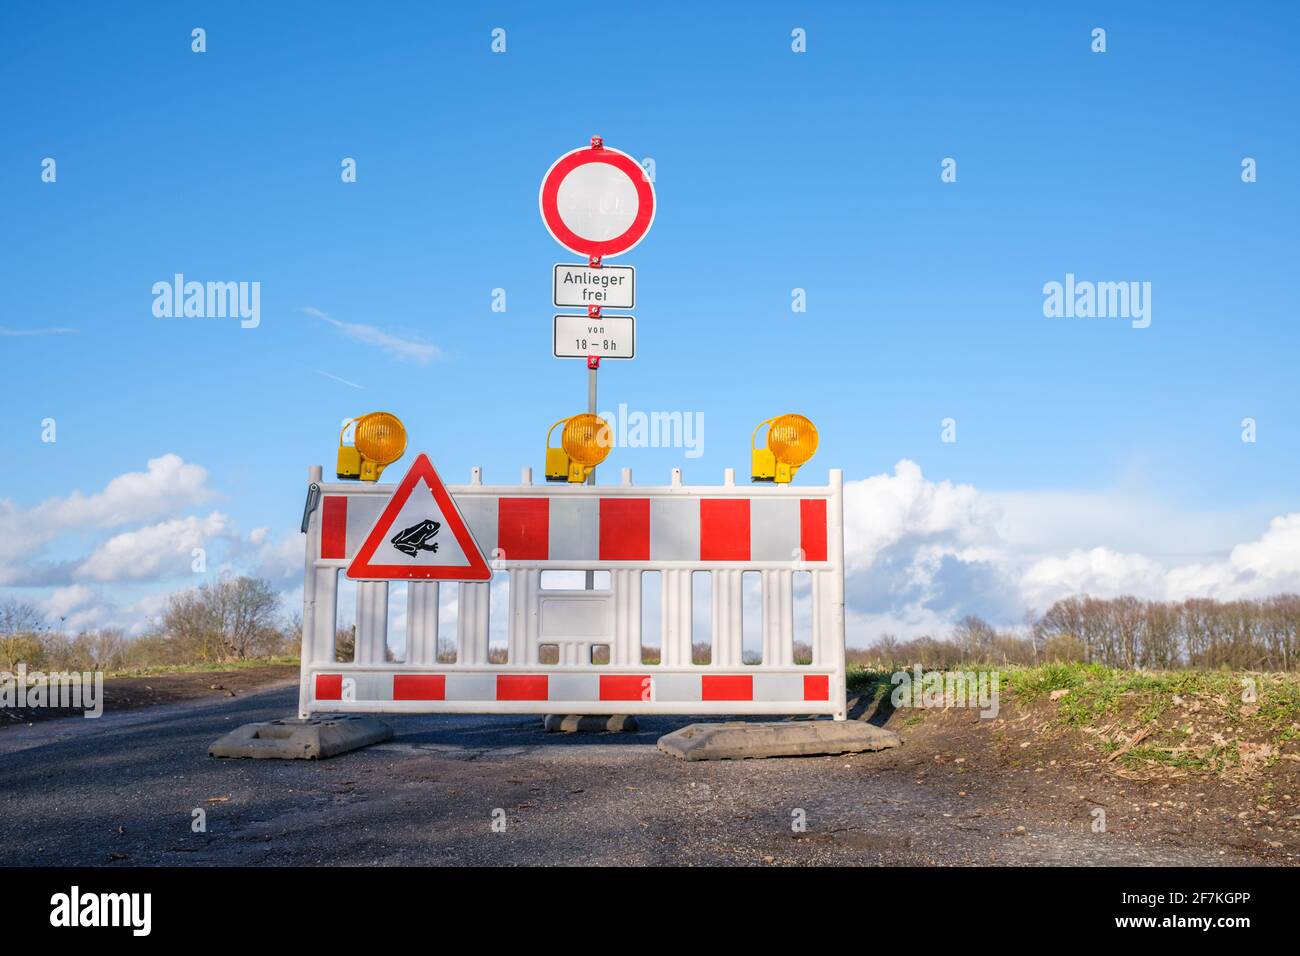 Roadblock with German traffic sign meaning 'No through traffic, residents only between 18:00 to 8:00'. Road closed with a barrier for toad migration. Stock Photo